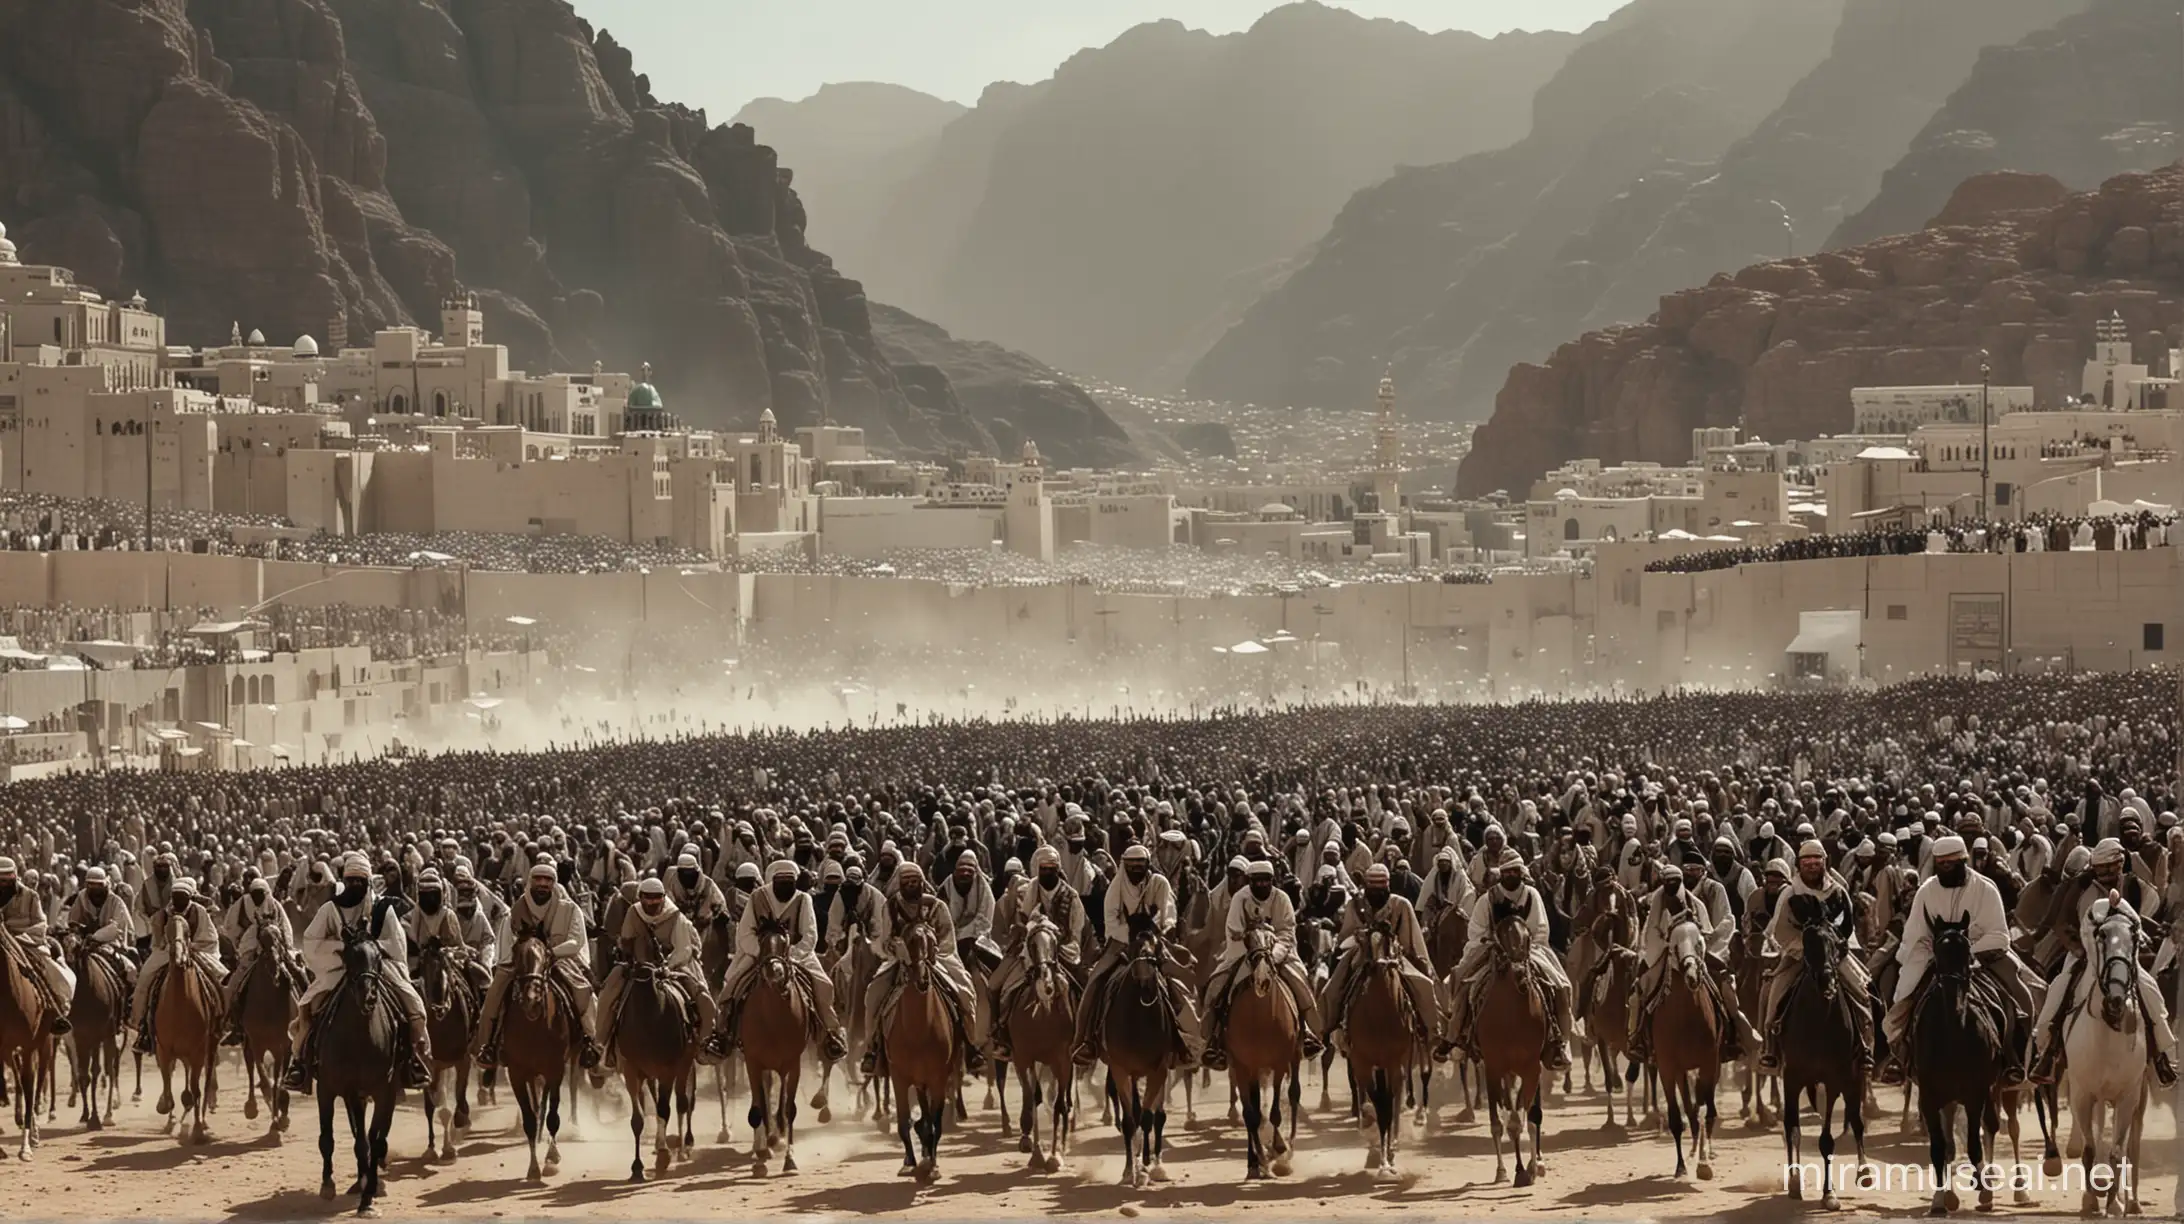 cinematic view of  muslim army led by prophet muhammad to conquest Makkah  in 8 AH